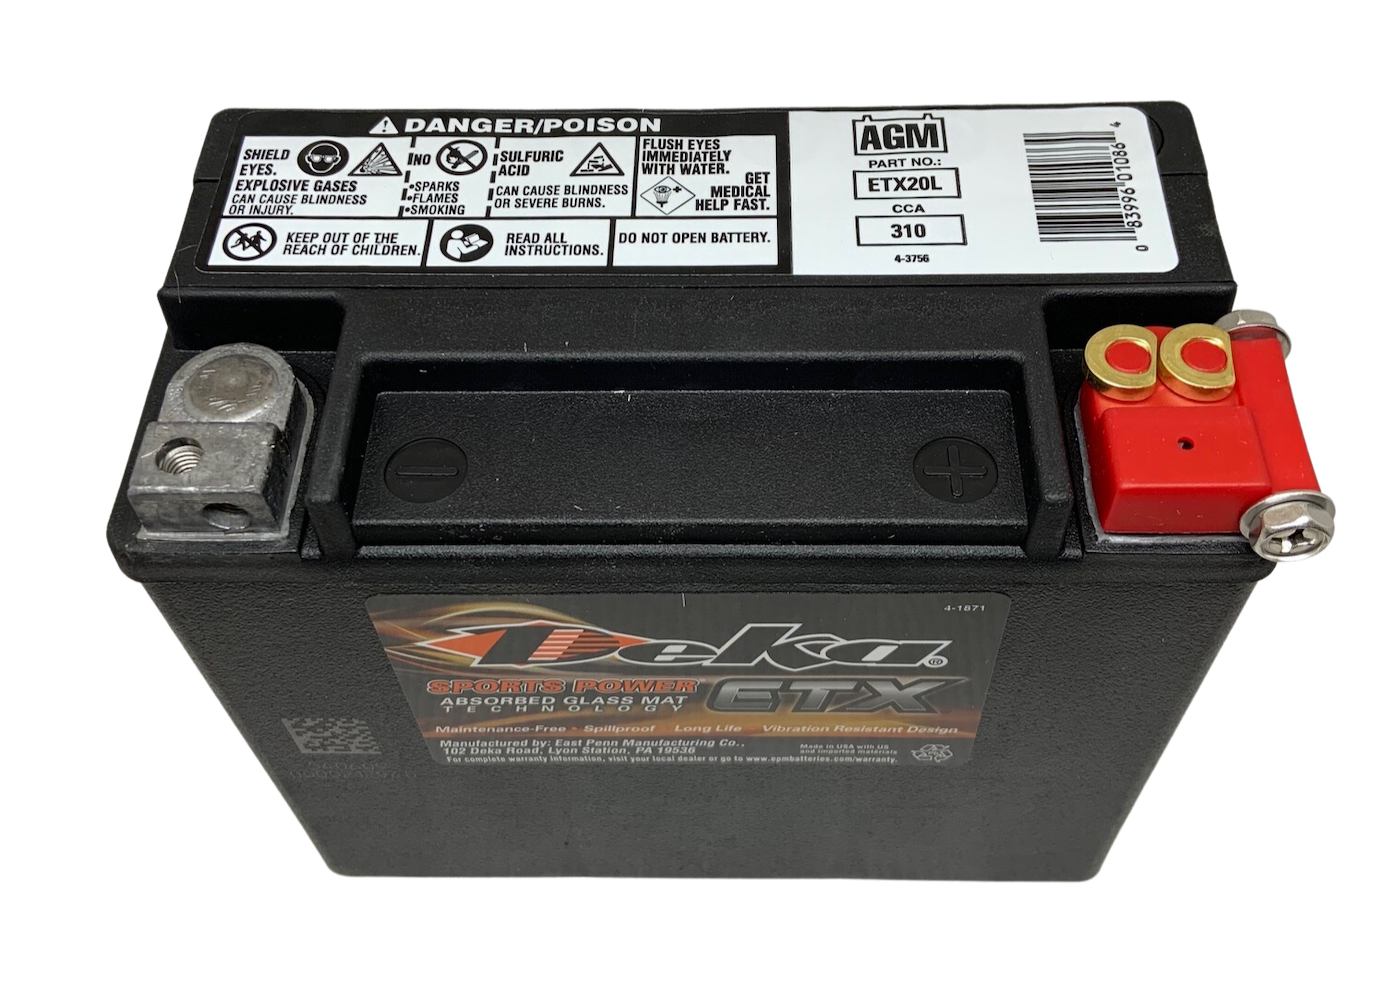 Why do some deka etx20l batteries have a gray bottom and some like this picture has a black bottom?  Any difference